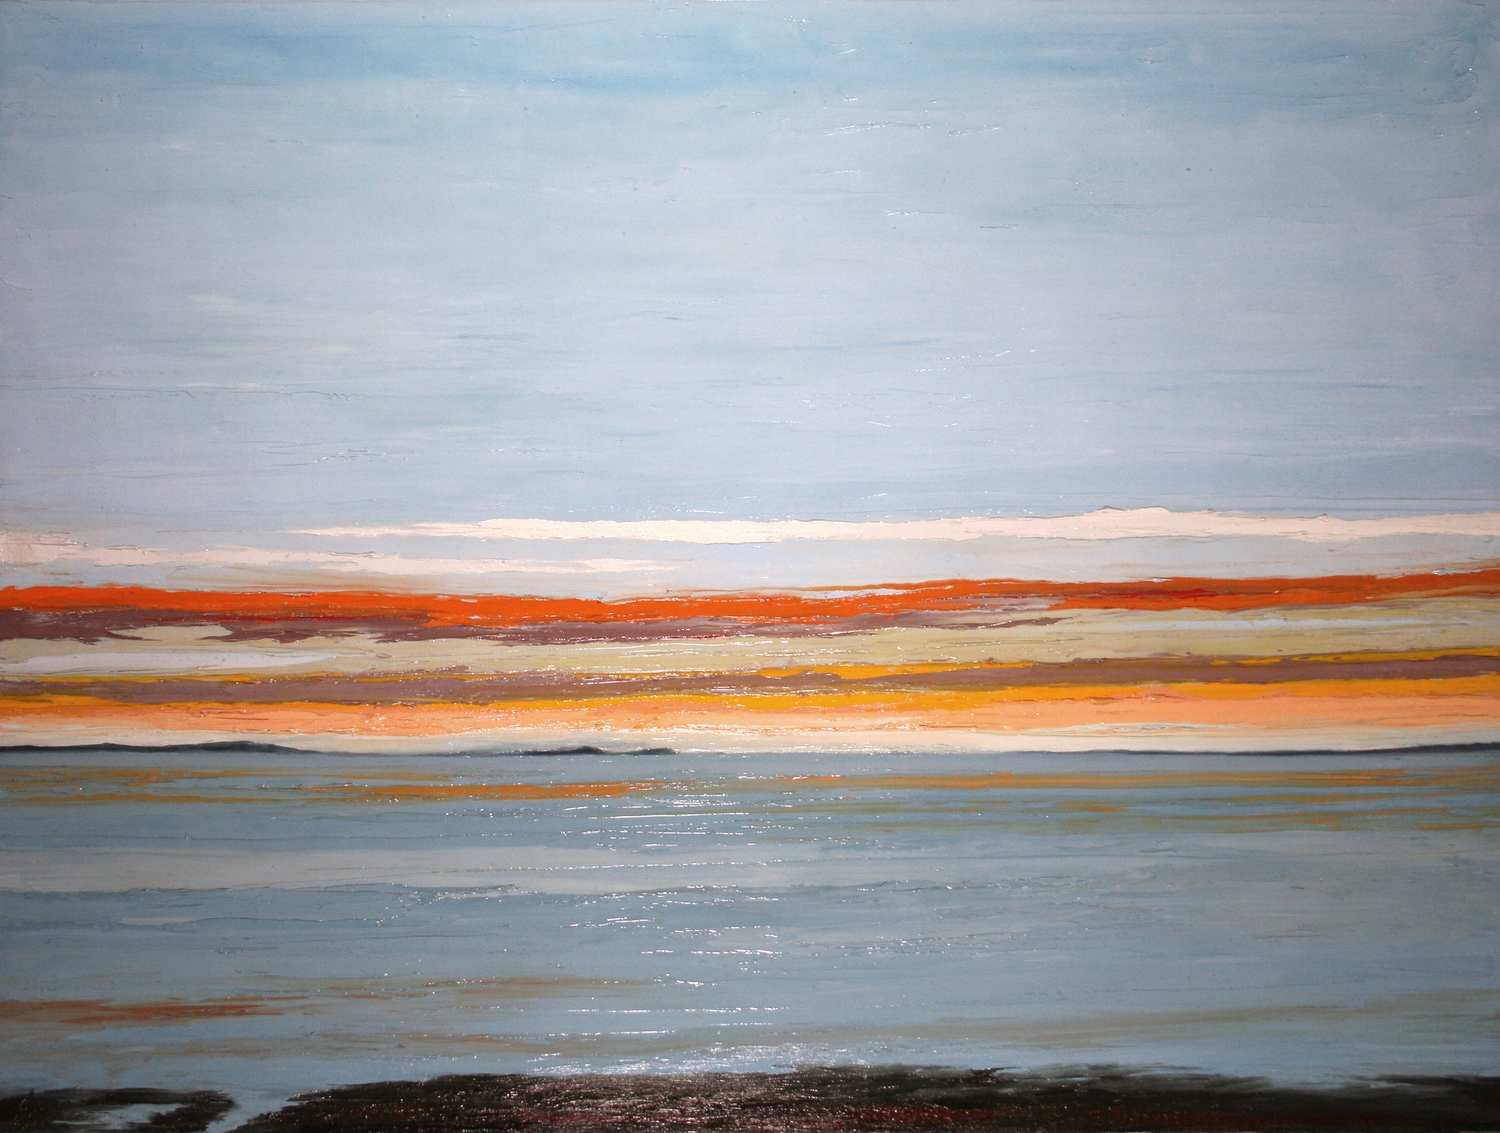 Cuhna View, Plymouth, MA, oil on canvas, 36 by 48 inches, 2014